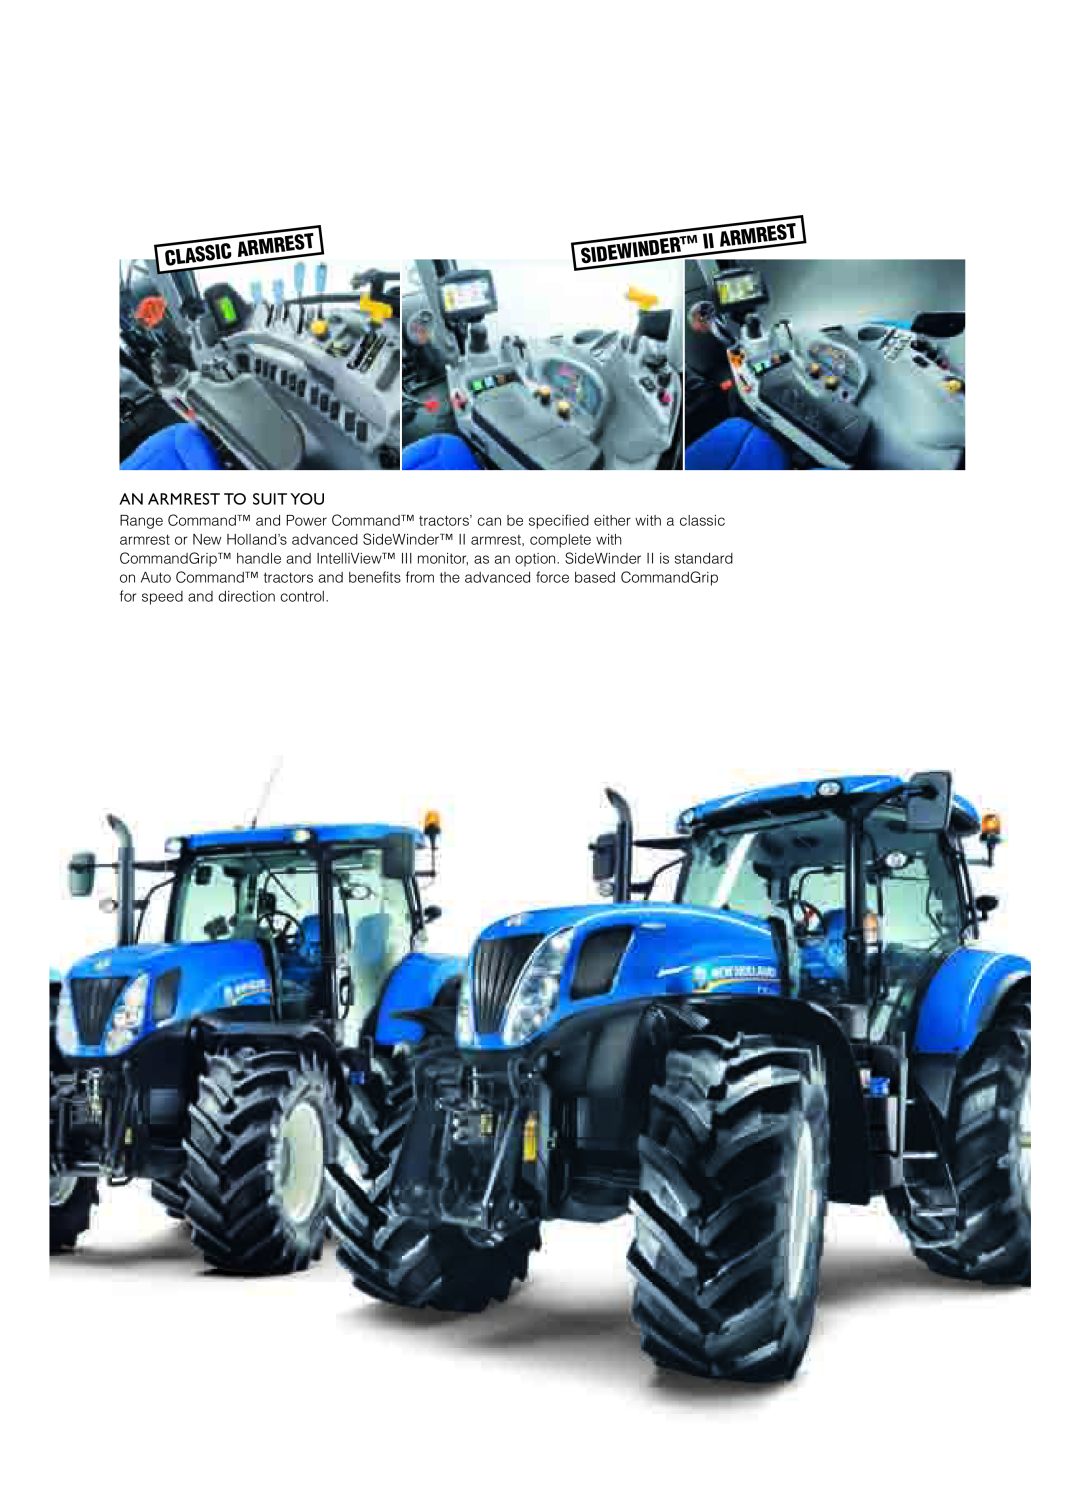 New Holland T7.200, T7.270, T7.260, T7.185, T7.210, T7.235, T7.170 Sidewinder, Ii Armrest, Classic, An Armrest To Suit You 